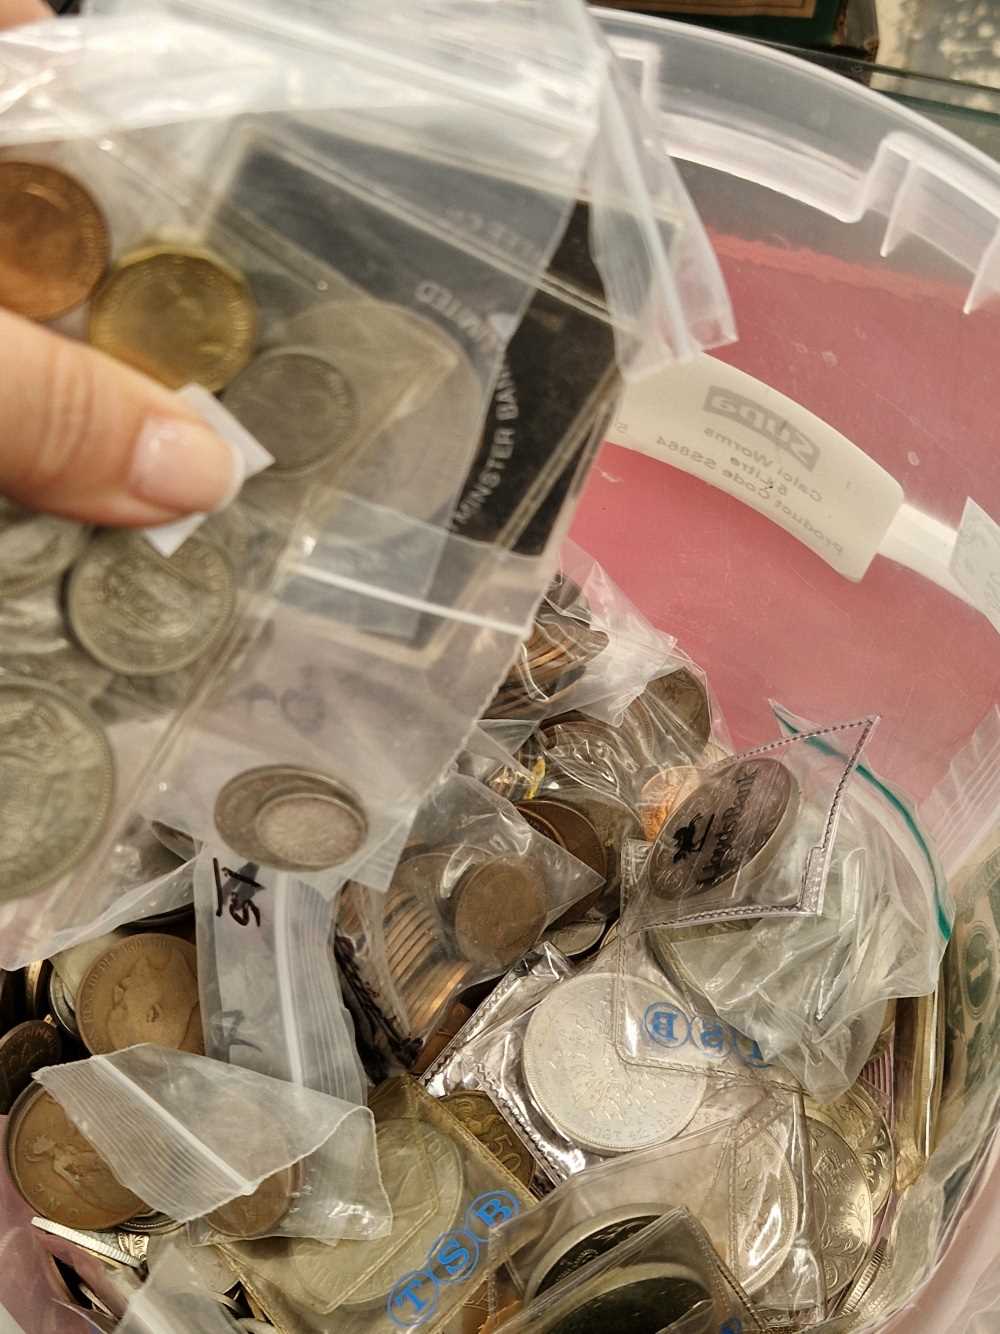 A large collection of GB coins including crowns and commemoratives, together with vintage bank